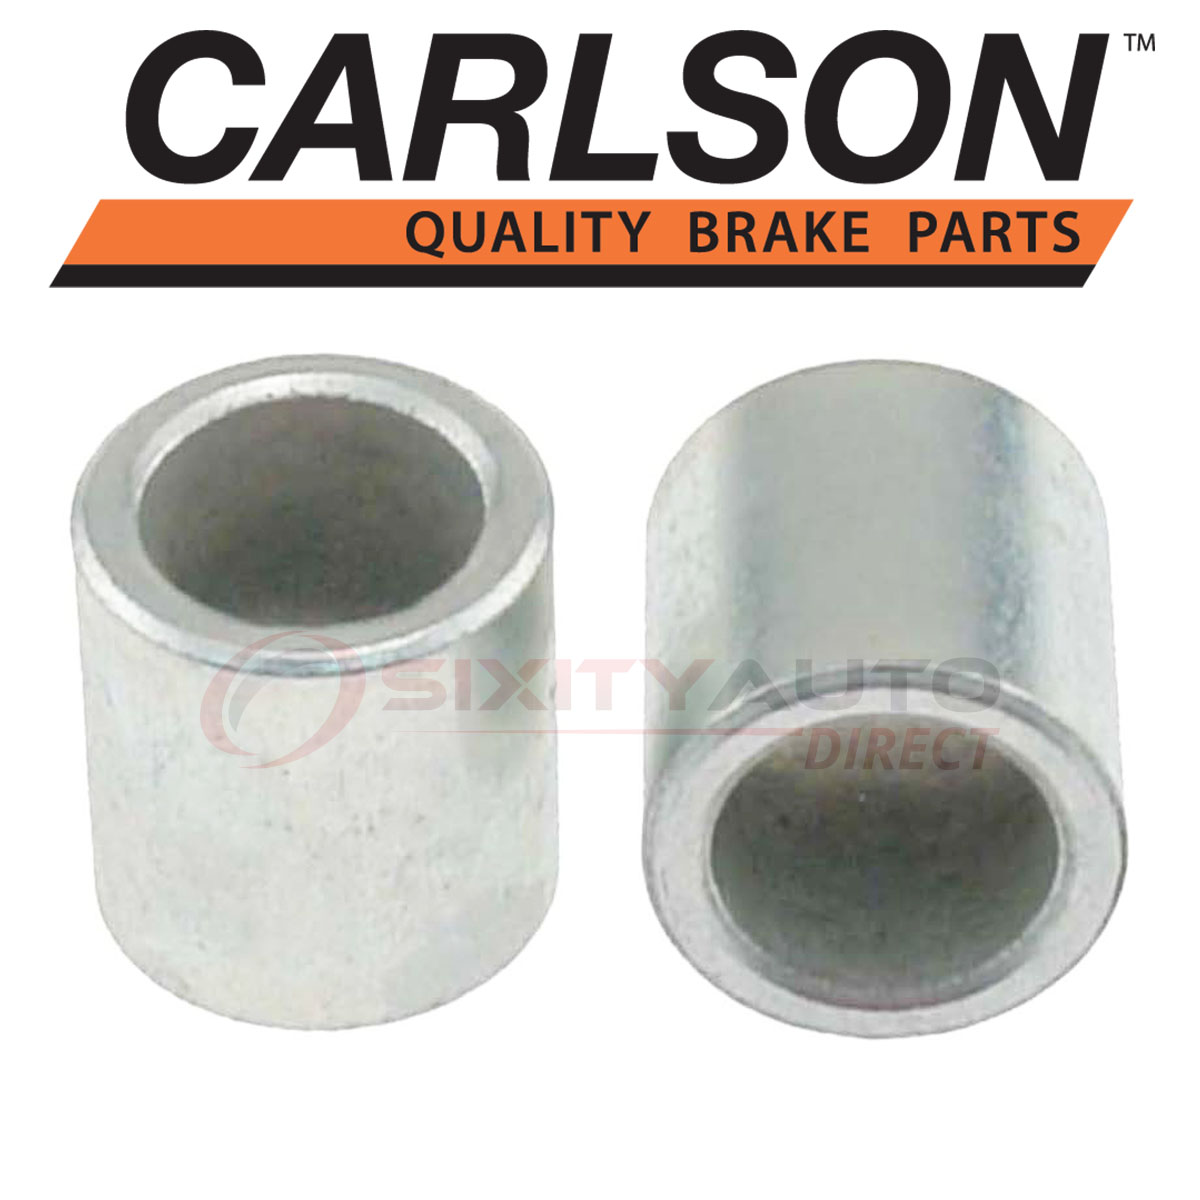 Carlson Front Brake Caliper Guide Pin Sleeve For 1974 1988 Jeep J10 